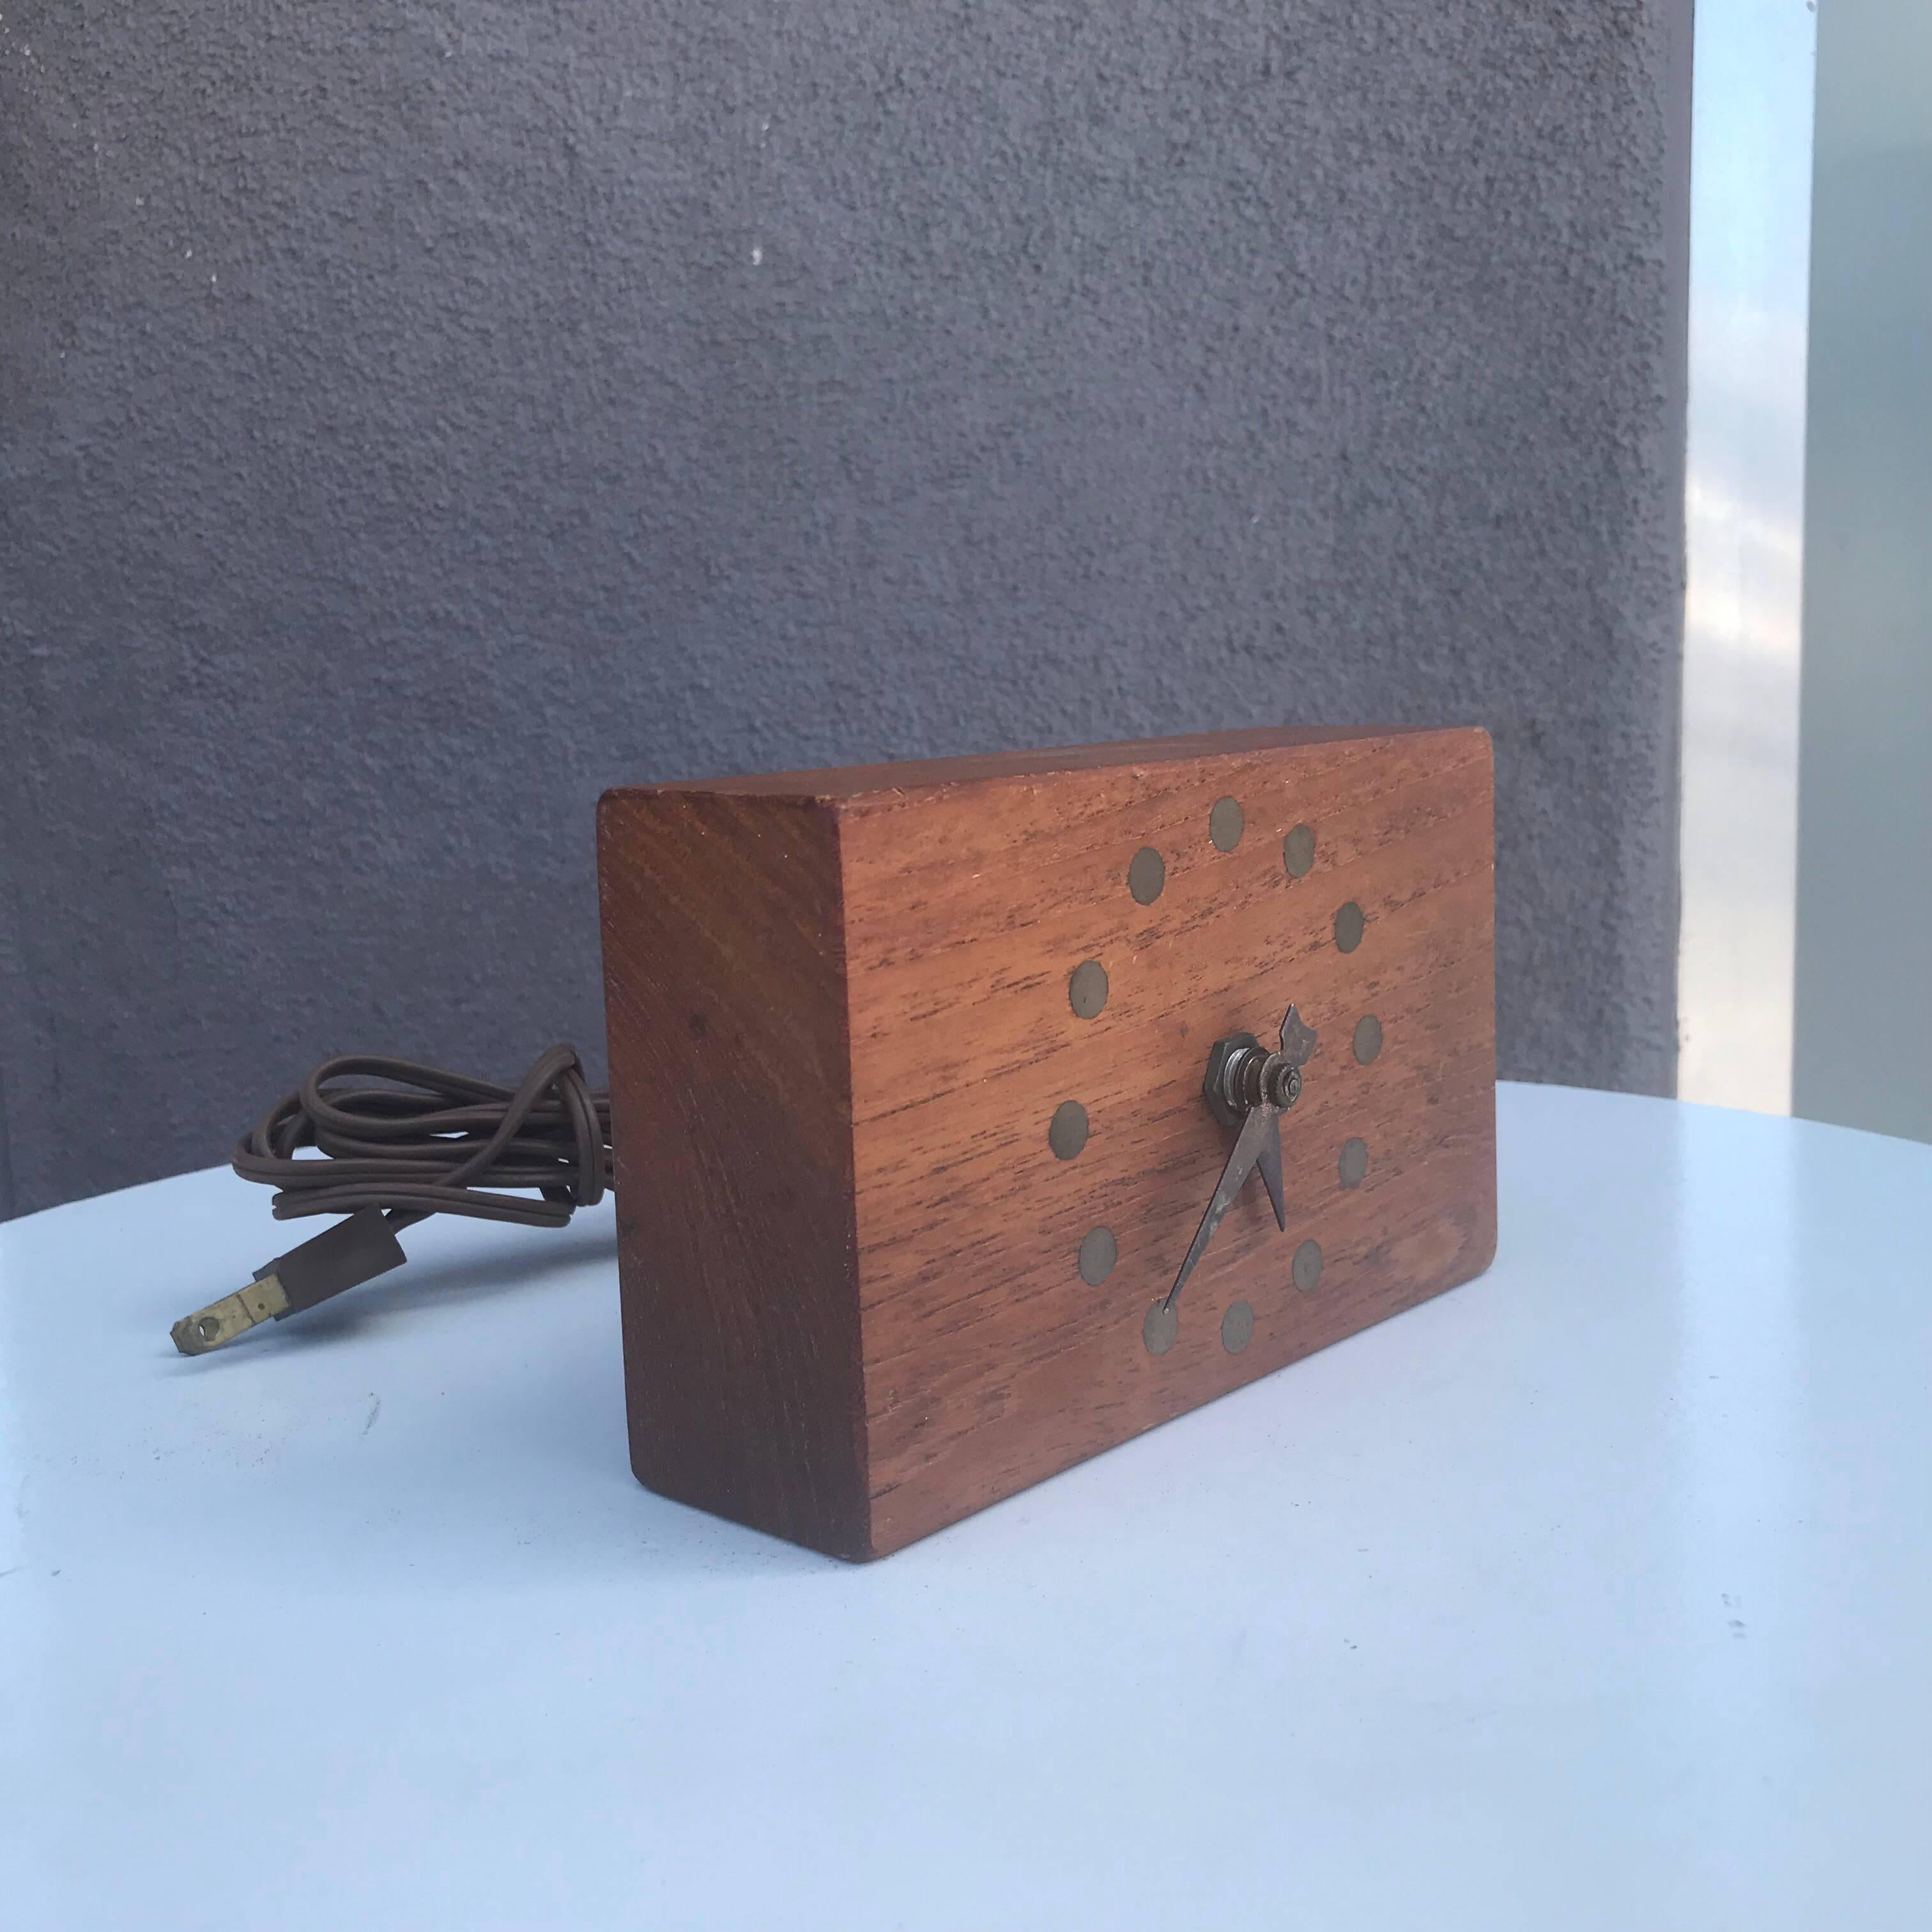 For your consideration, a Mid-Century Modern electric table clock teak and brass.
Dimensions: 3 7/8